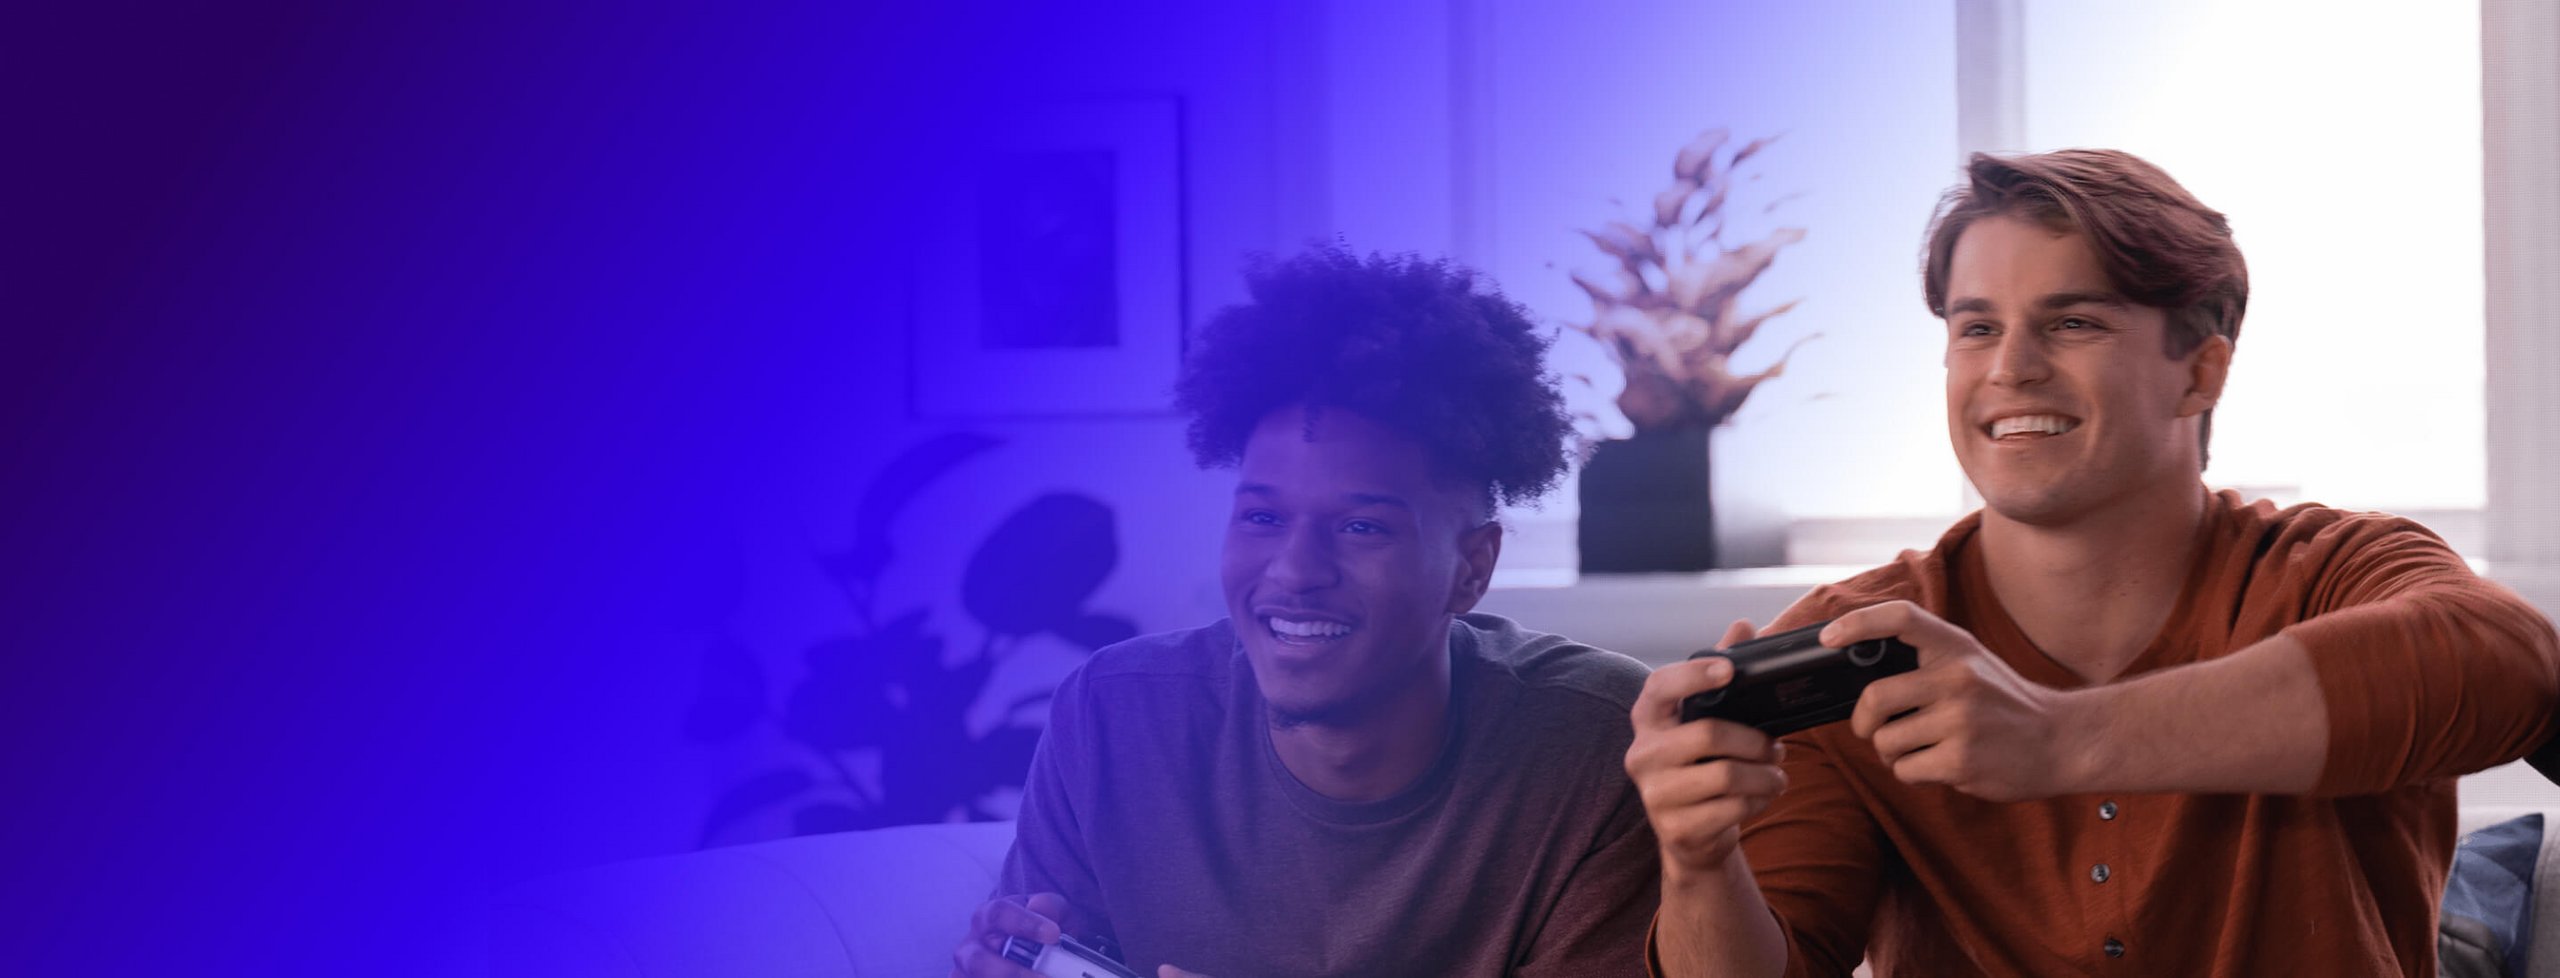 two guys playing a video game